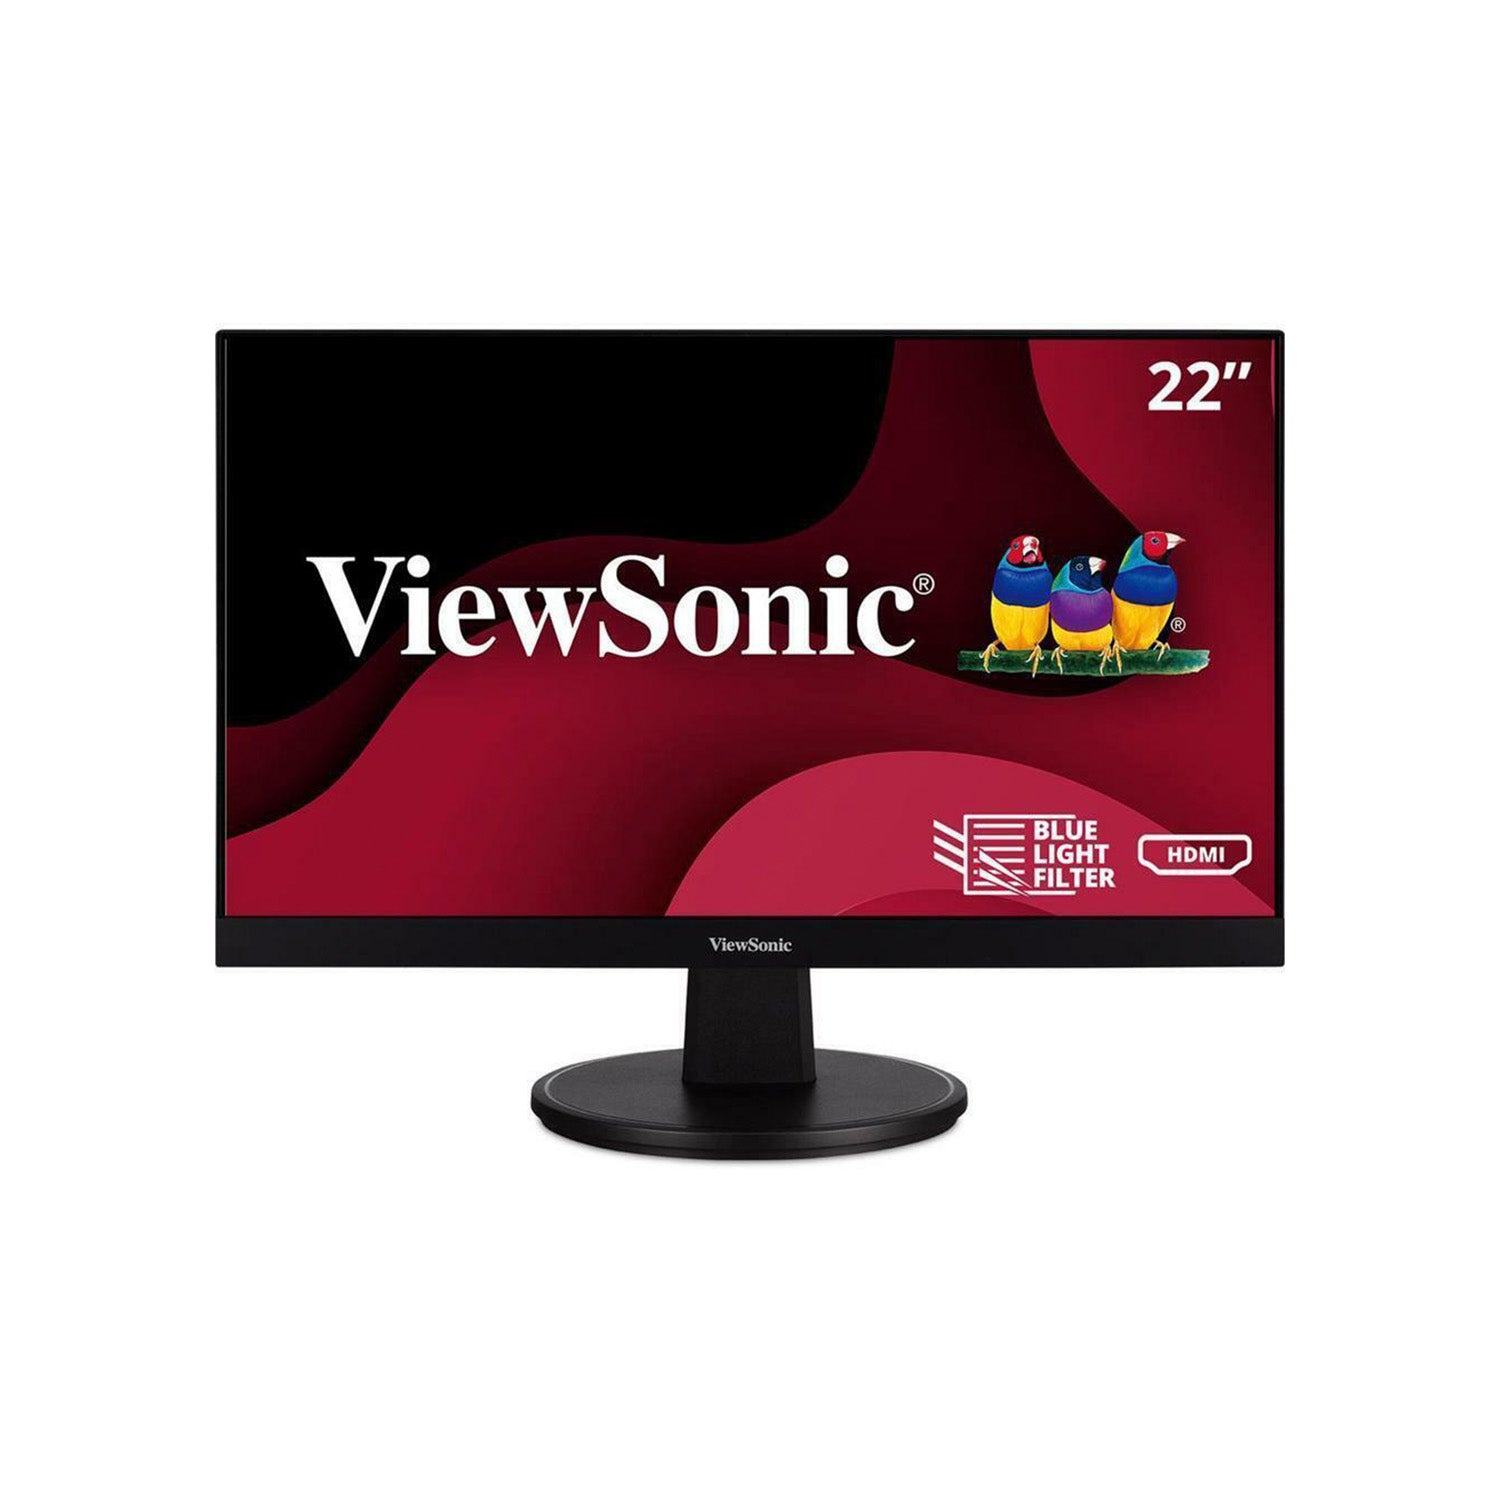 ViewSonic 22" Inch FHD 1080p Monitor with 75Hz refresh rate, Thin Bezels, AMD FreeSync, Eye Care, Built-in Speakers, Wall Mountable HDMI/VGA Home and Office Use (VA2247-MH) - Black